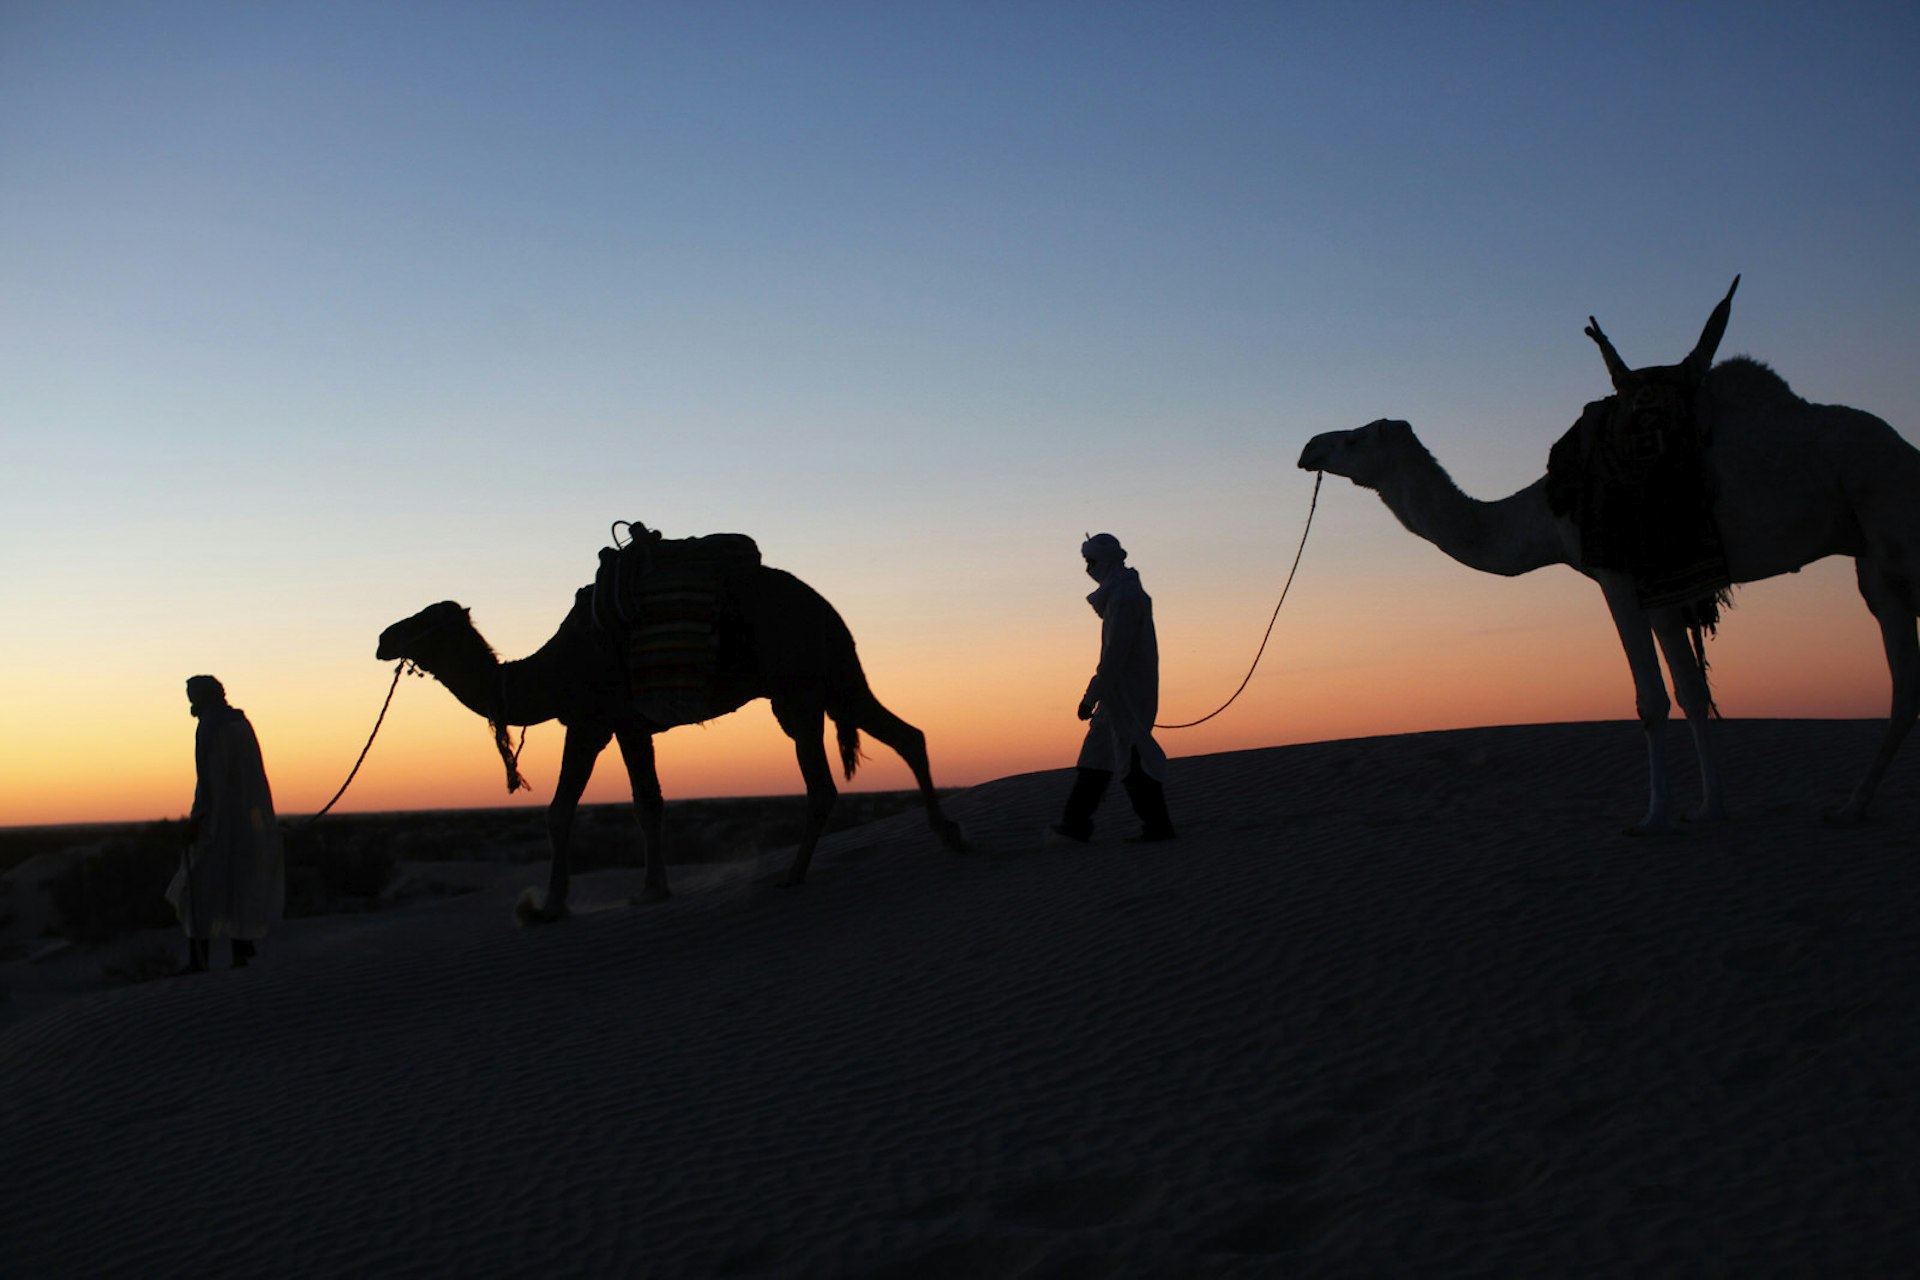 Camel drivers and camels silhouetted against the sunset at dusk in the Sahara desert, near Douz, Tunisia